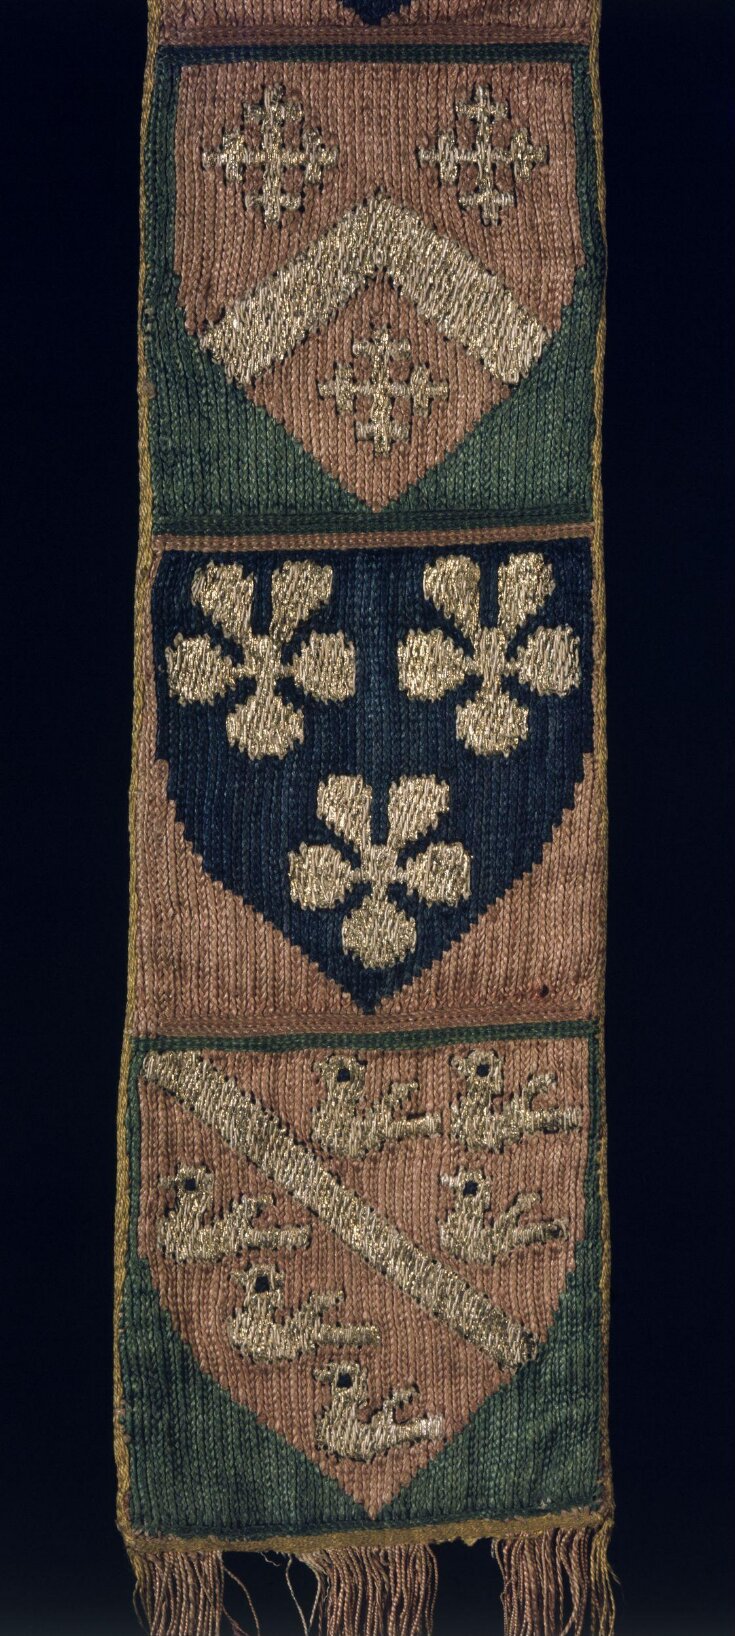 Ecclesiastical Stole top image